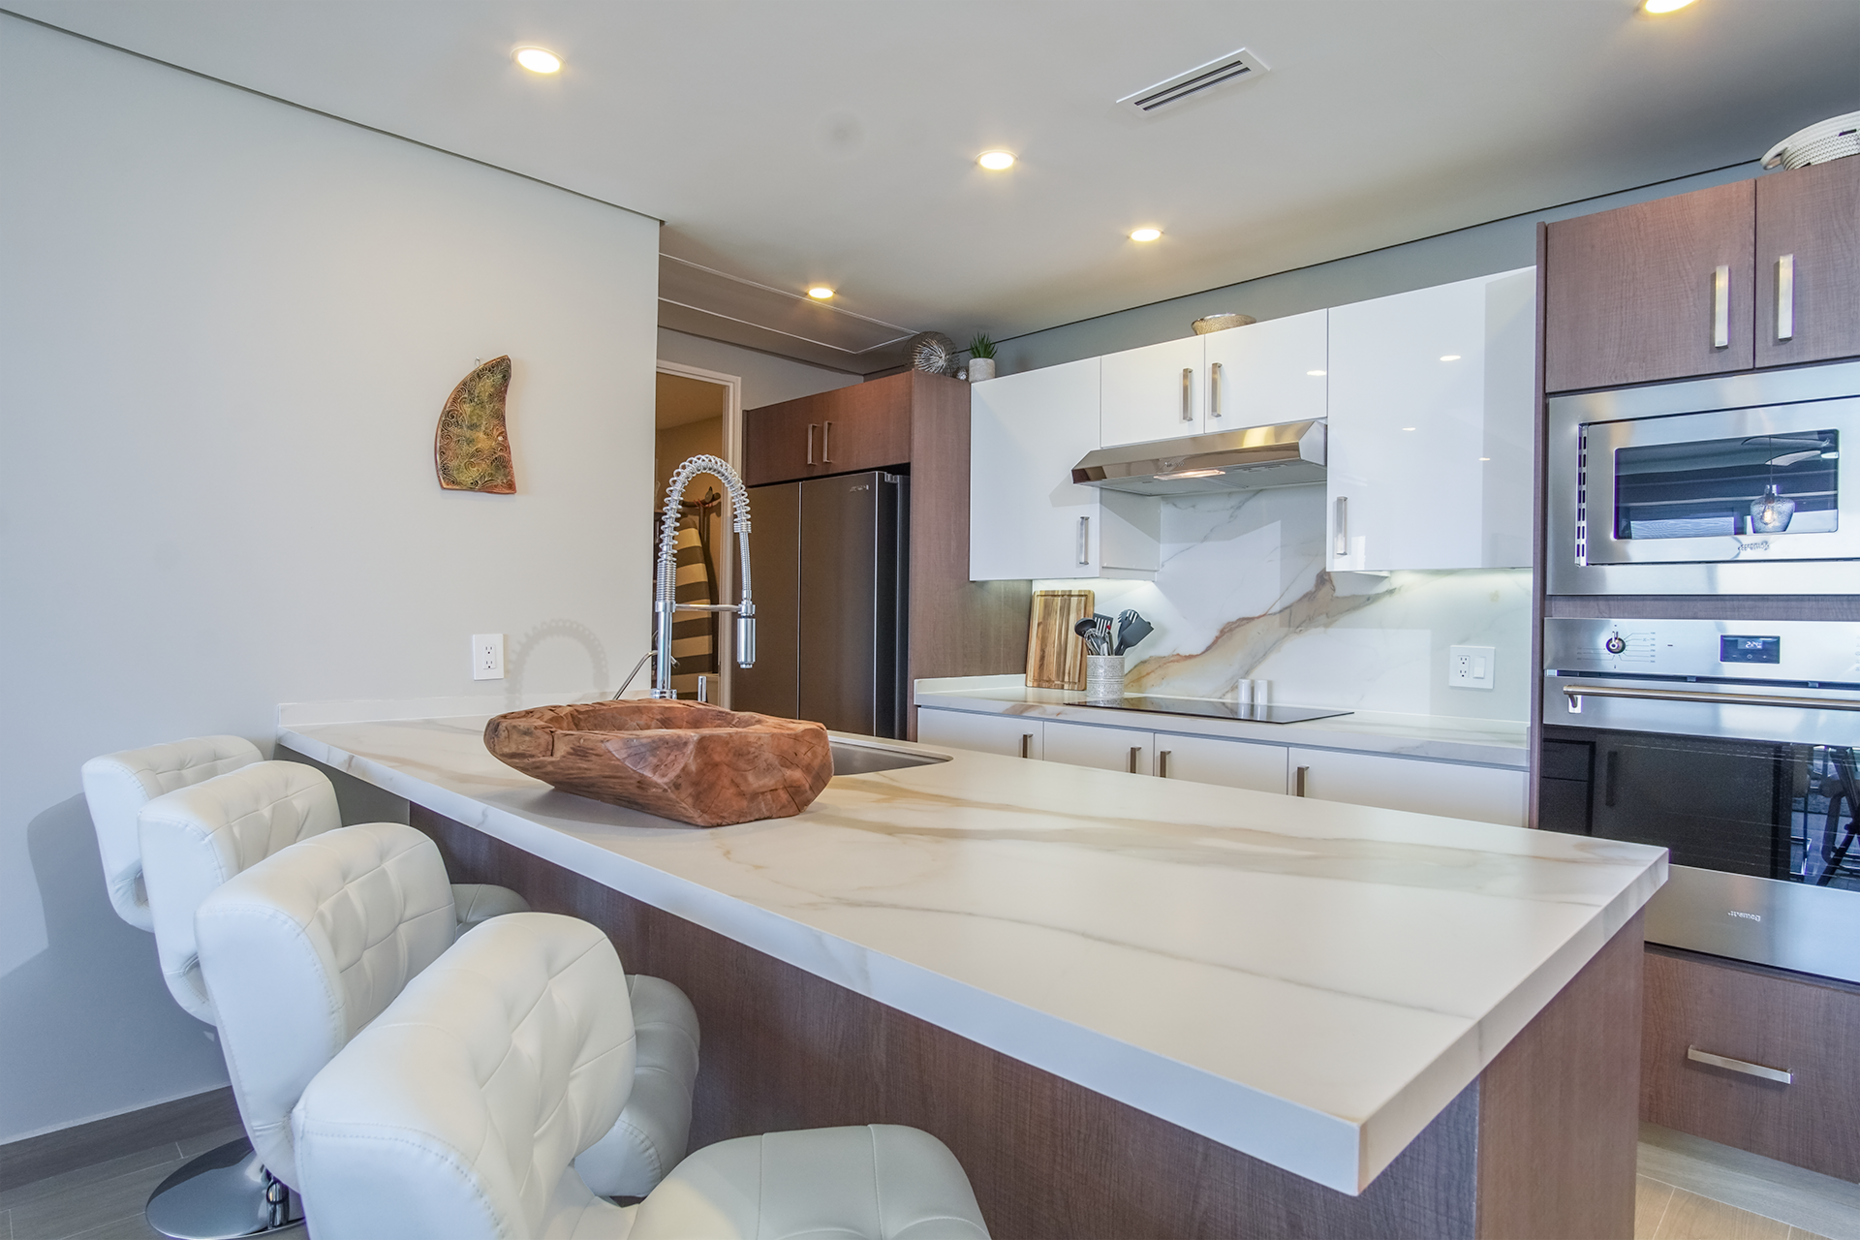 countertop with seating in the kitchen